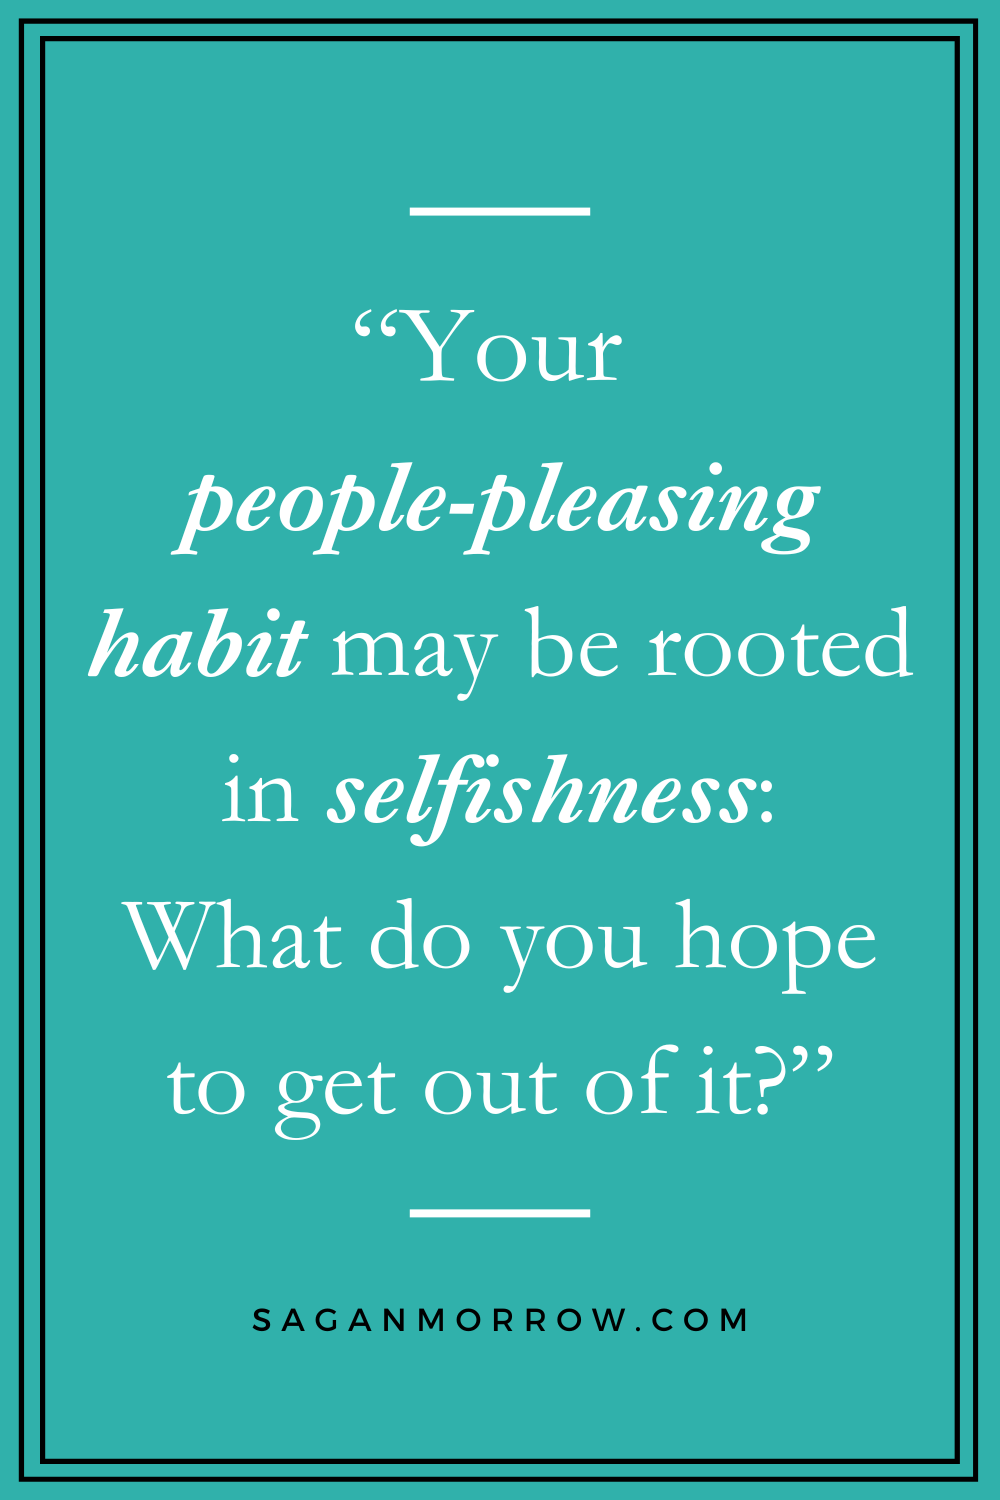 Your people pleasing habit may be rooted in selfishness: what do you how to get out of it? quotes about being a people pleaser